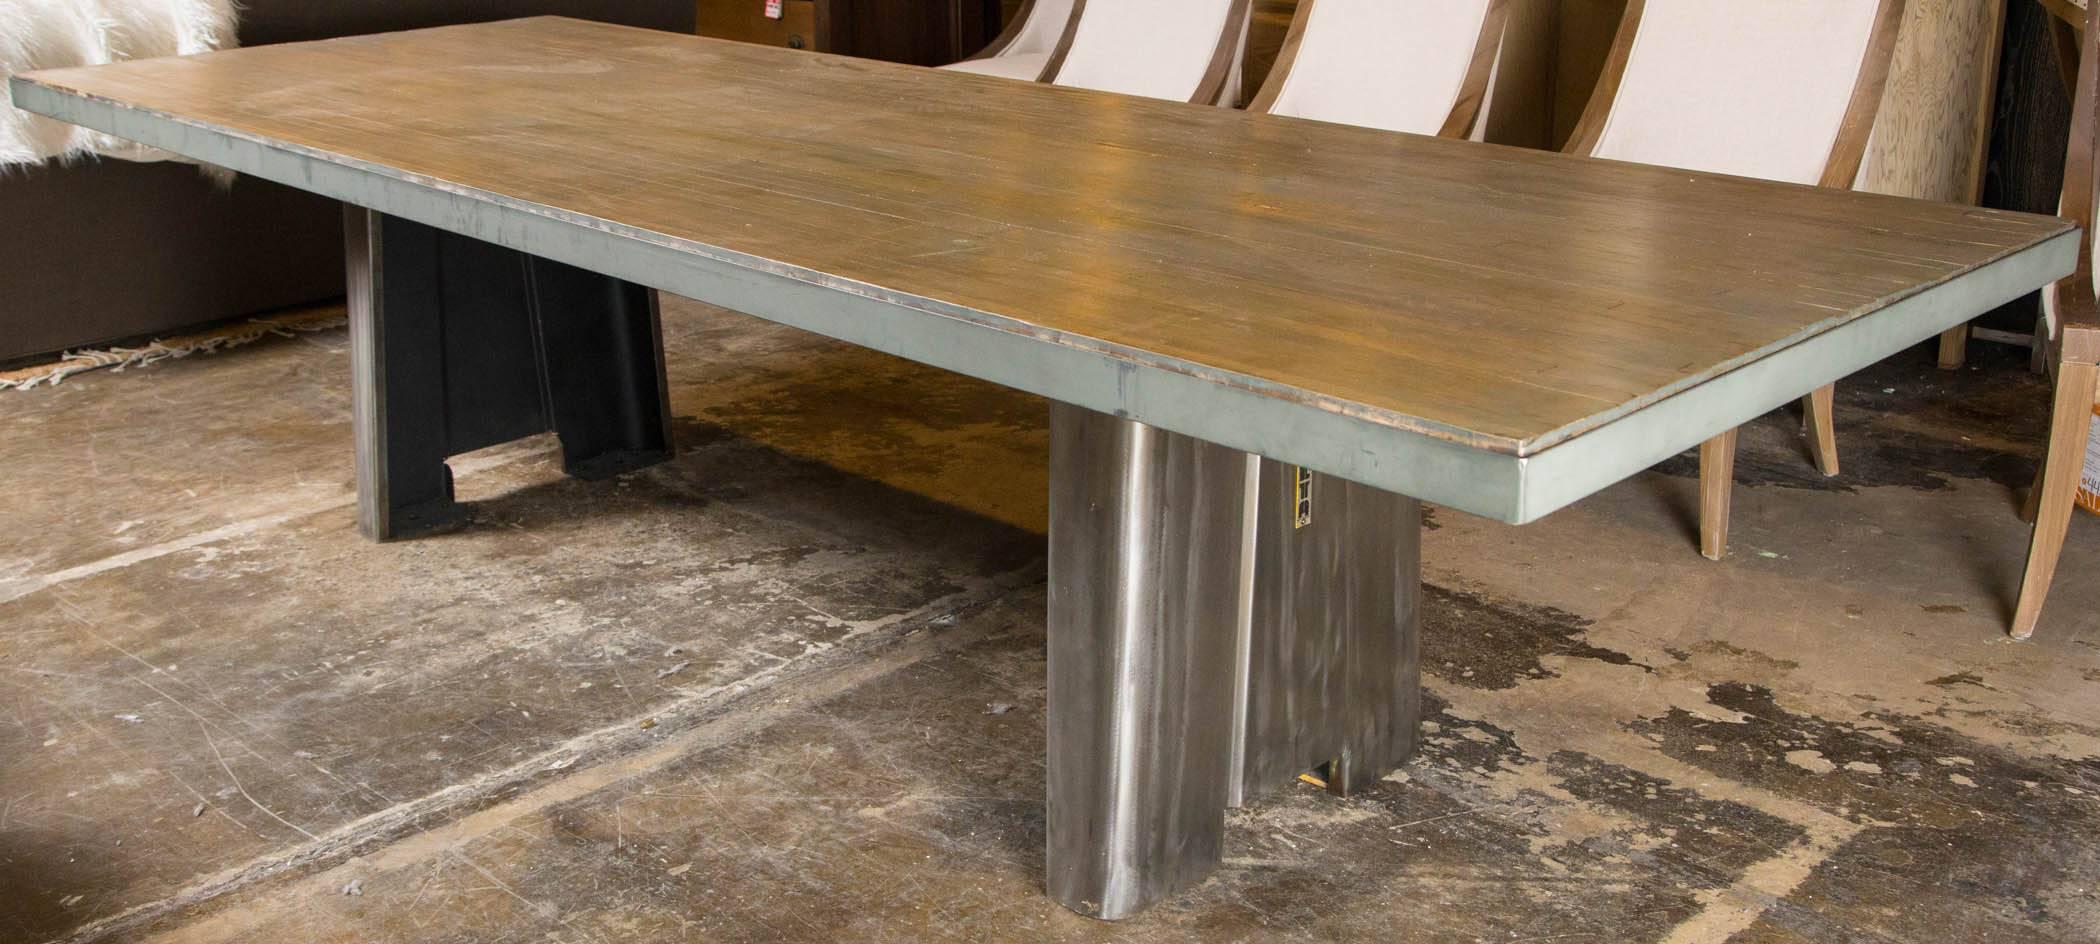 Bowing Alley Top Industrial Base Table 3